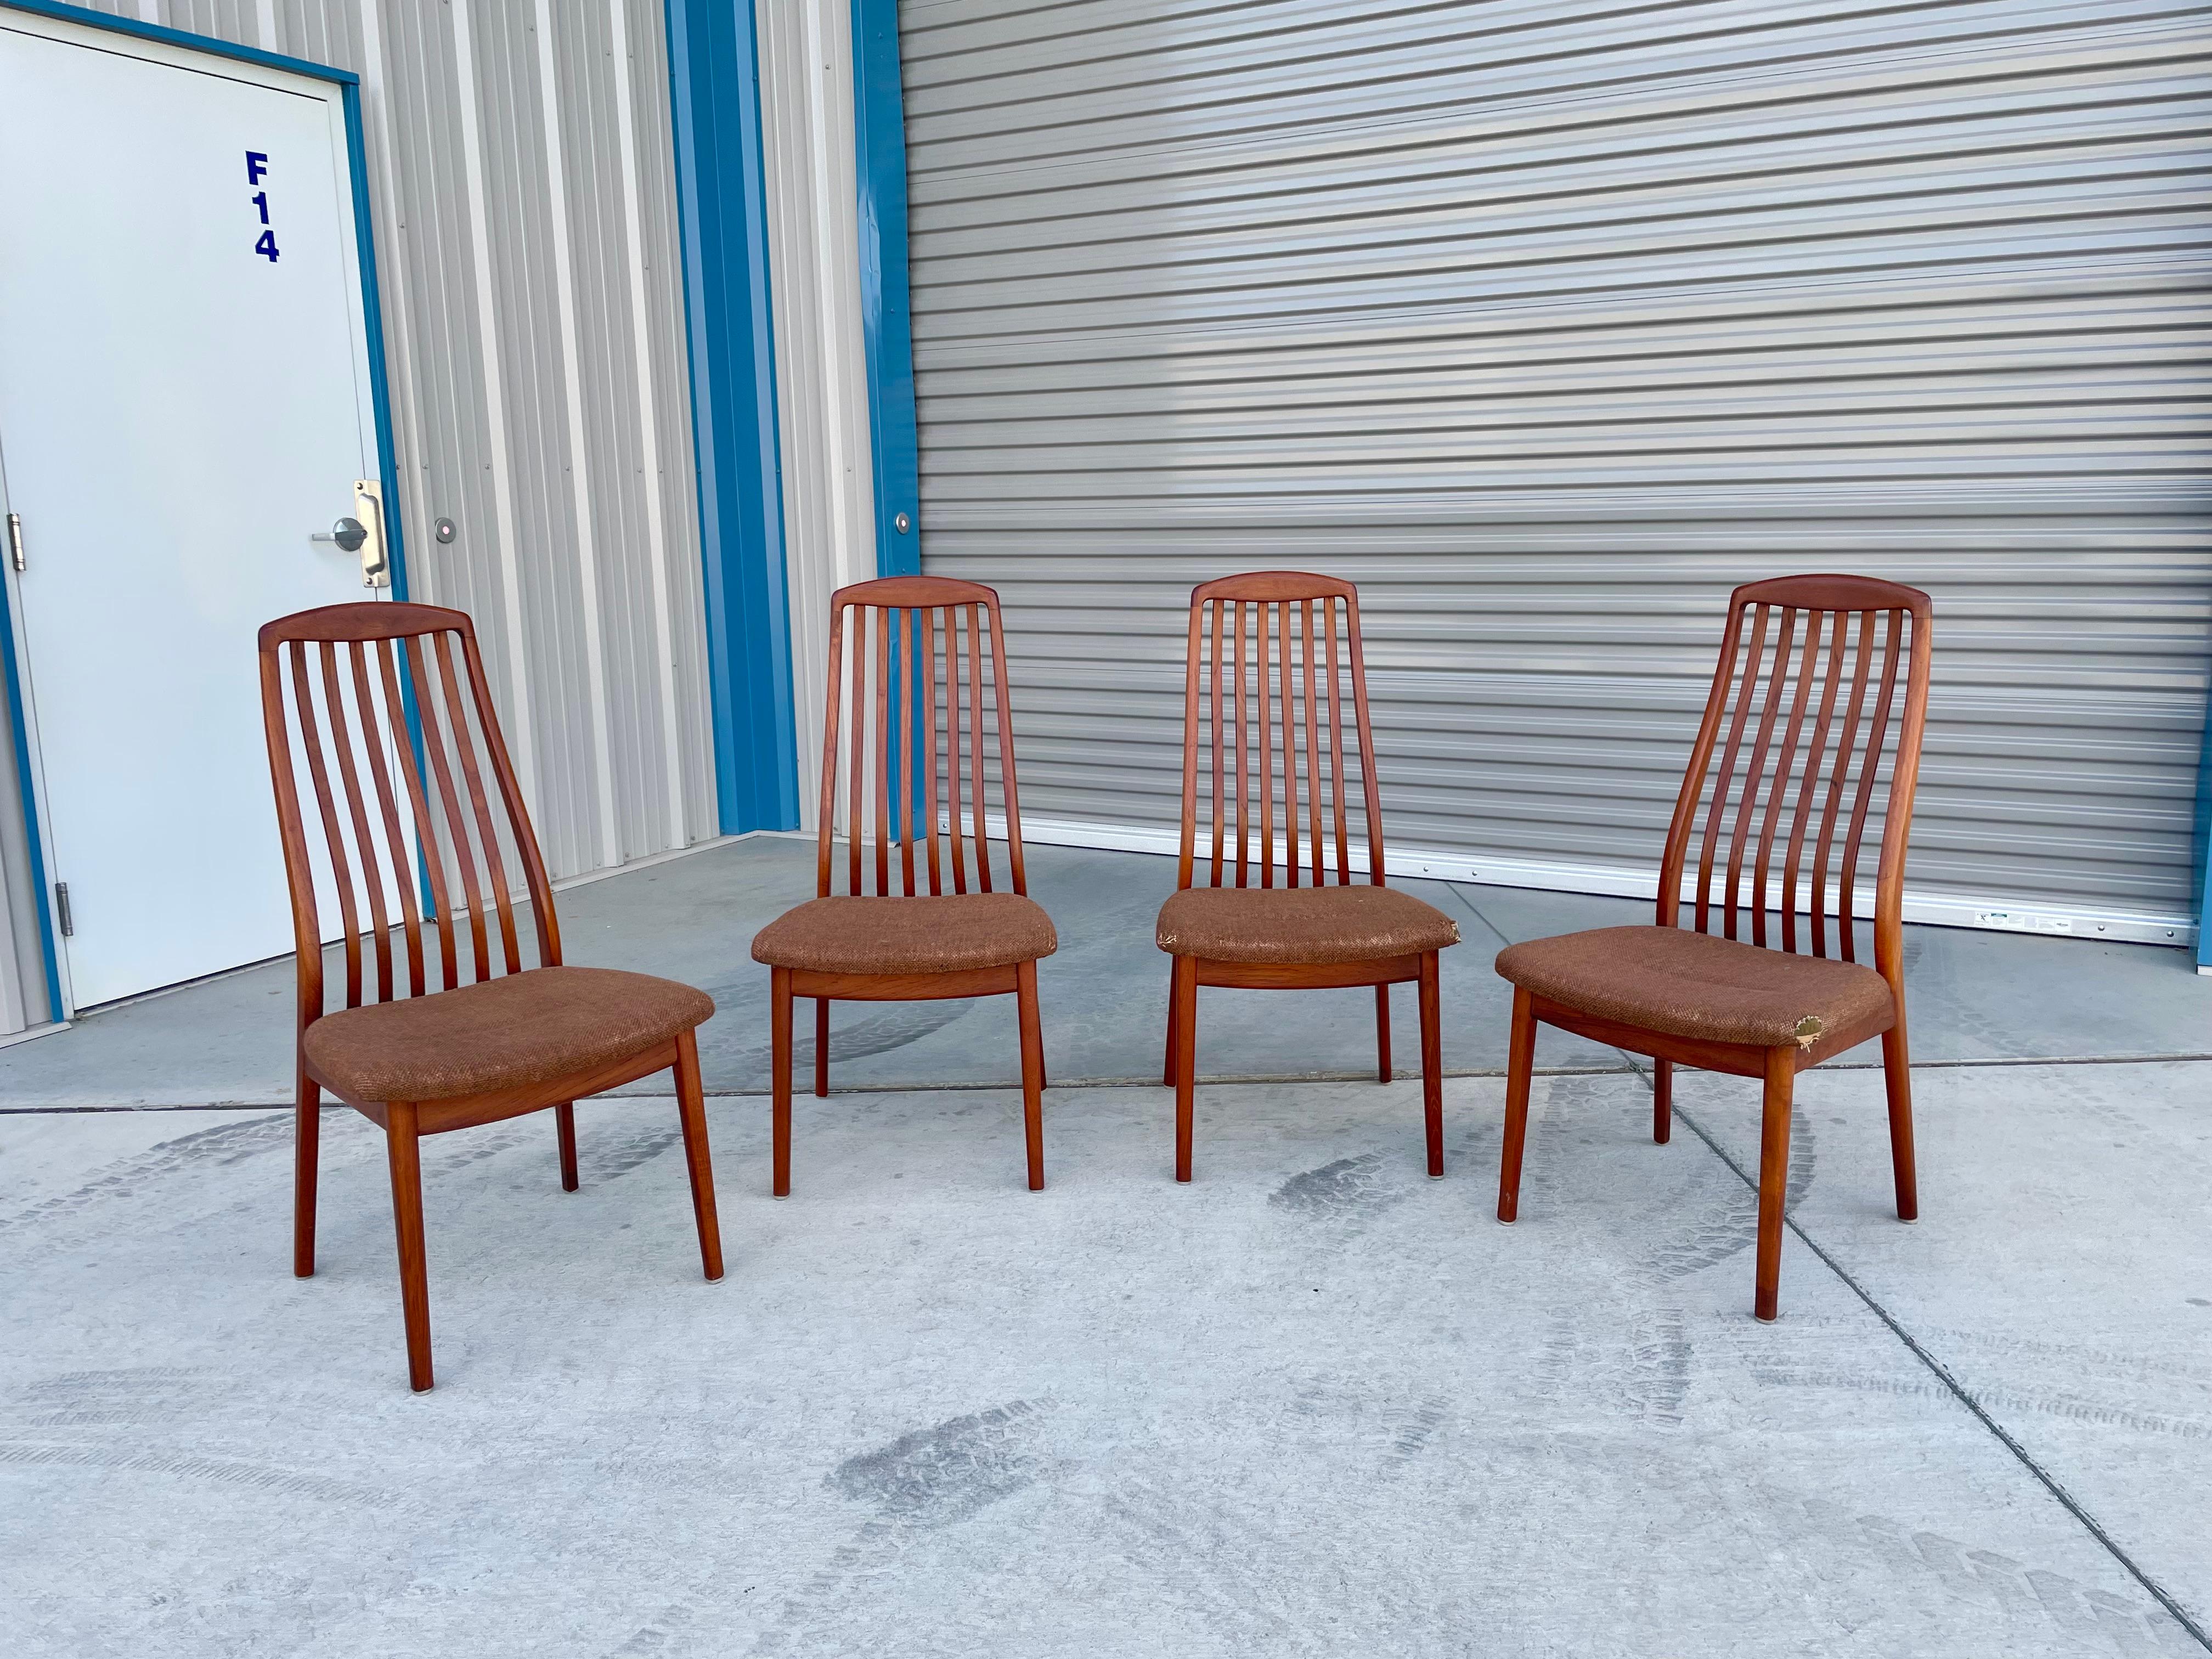 Danish modern teak dining chairs designed and manufactured by Preben-Schou in Denmark circa 1970s. These gorgeous dining chairs feature a teak frame giving them a refined and elegant look. The chair backrest is also one of the main features of its